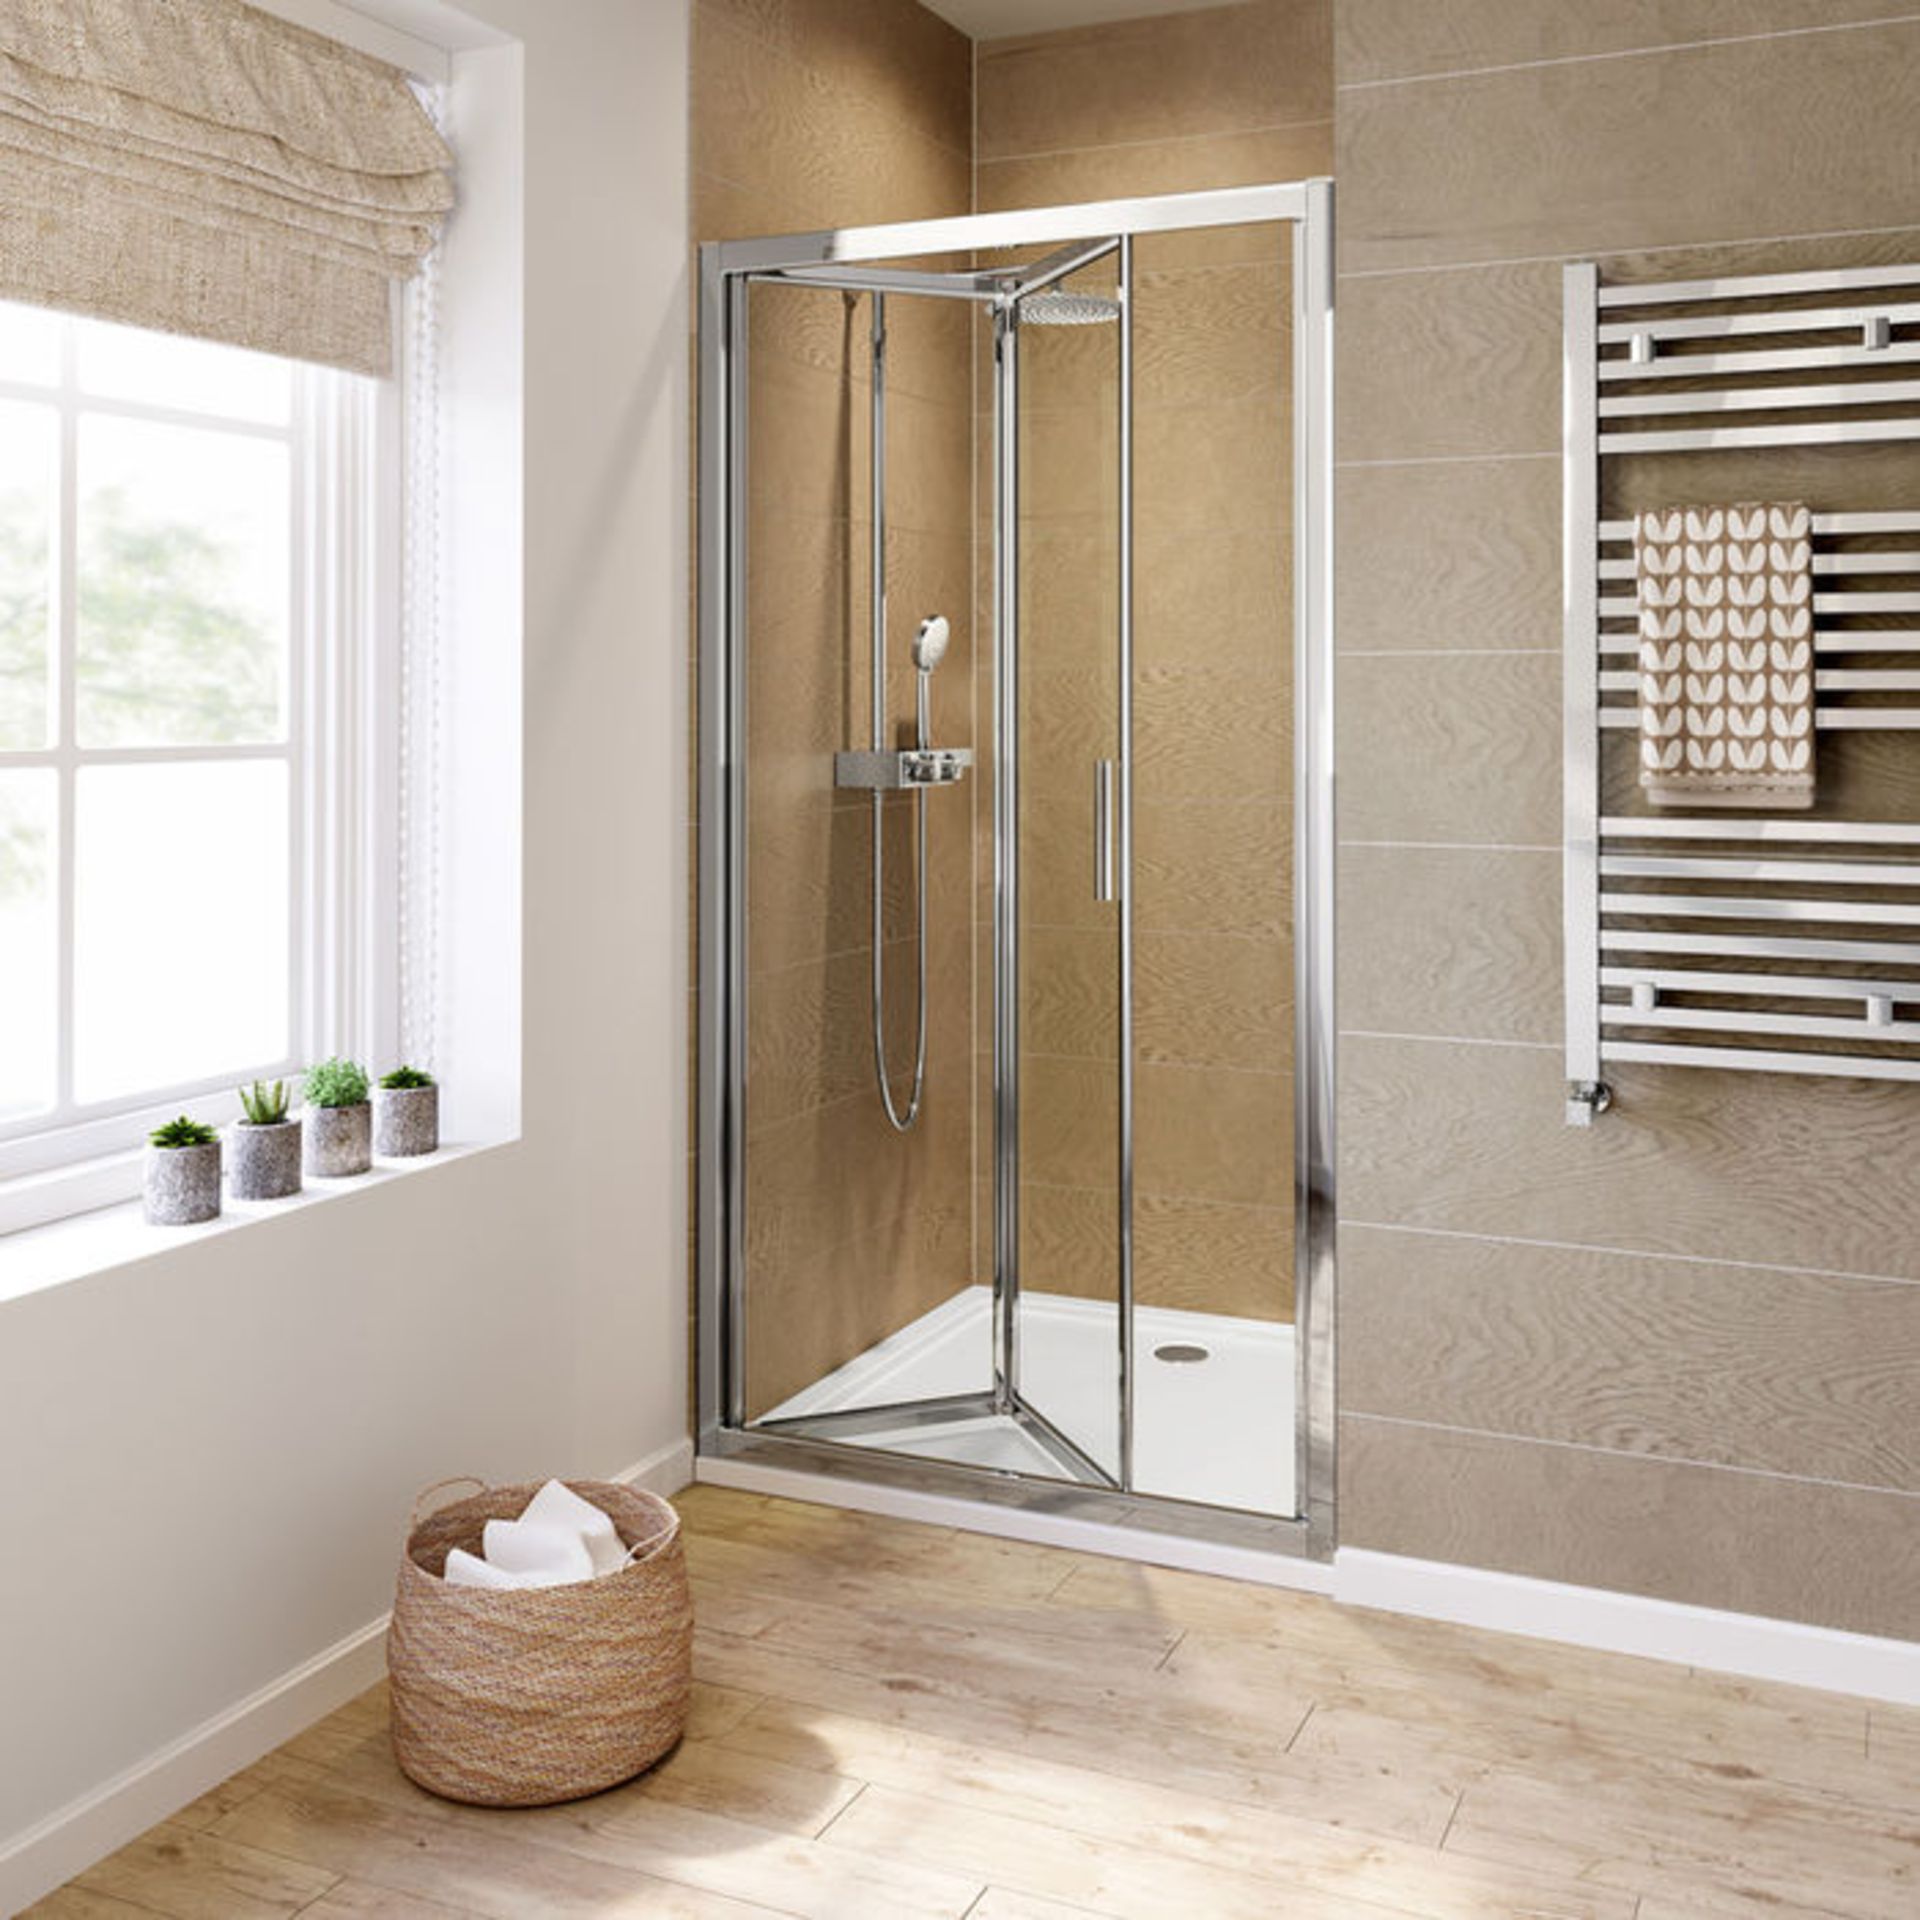 (XS307) 1000mm - 6mm - Elements EasyClean Bifold Shower Door. RRP £299.99. 6mm Safety Glass - - Image 2 of 6